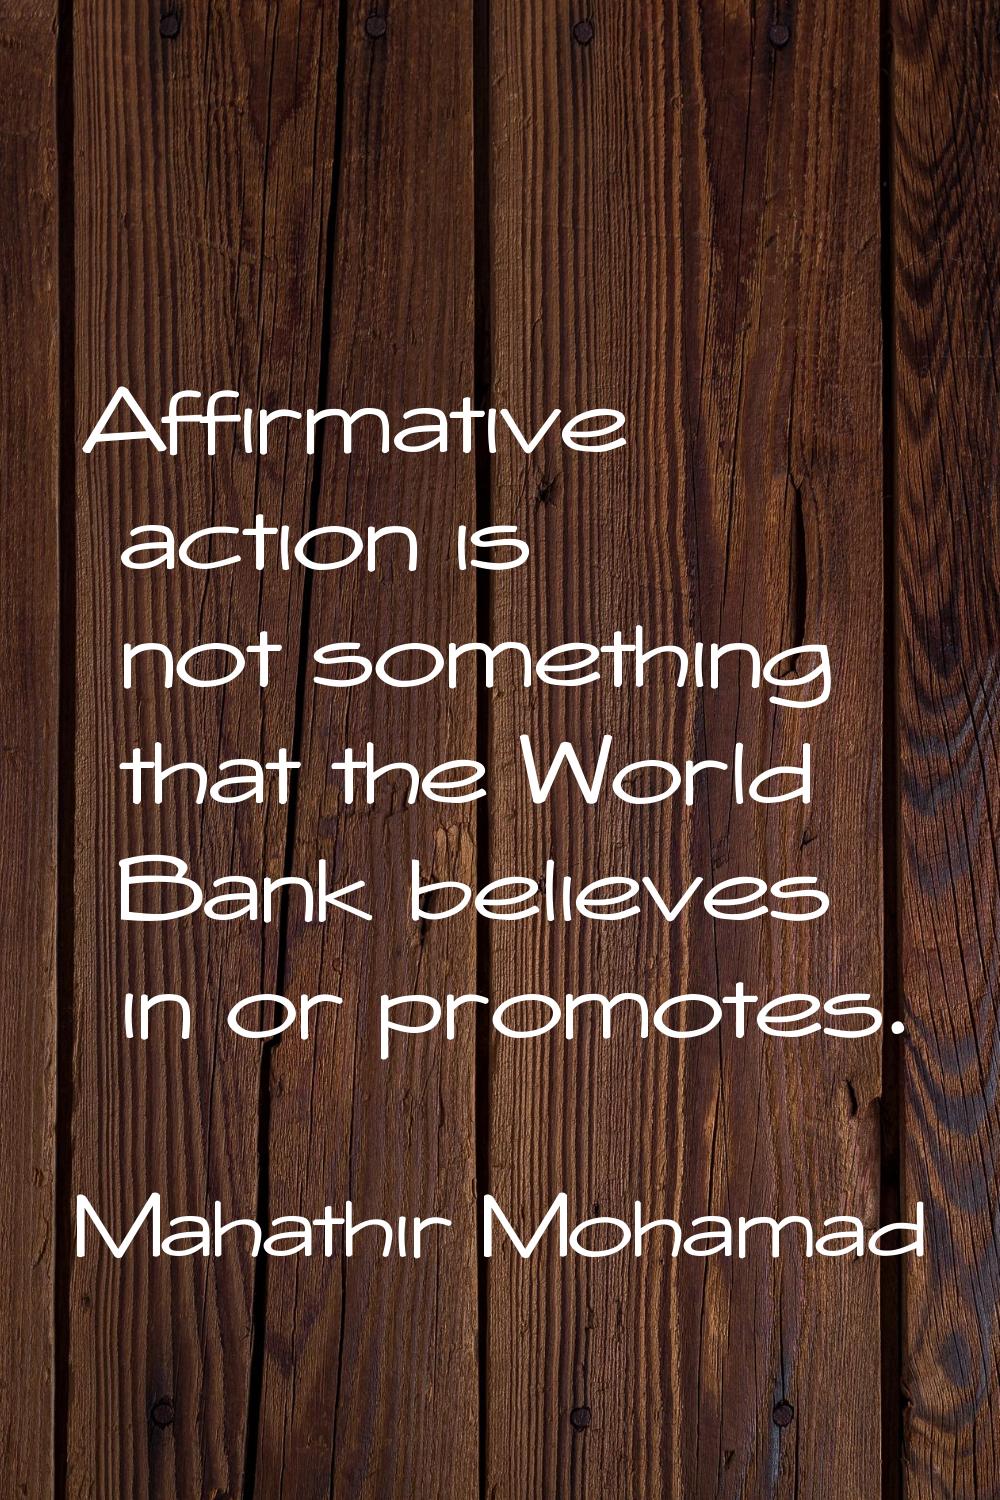 Affirmative action is not something that the World Bank believes in or promotes.